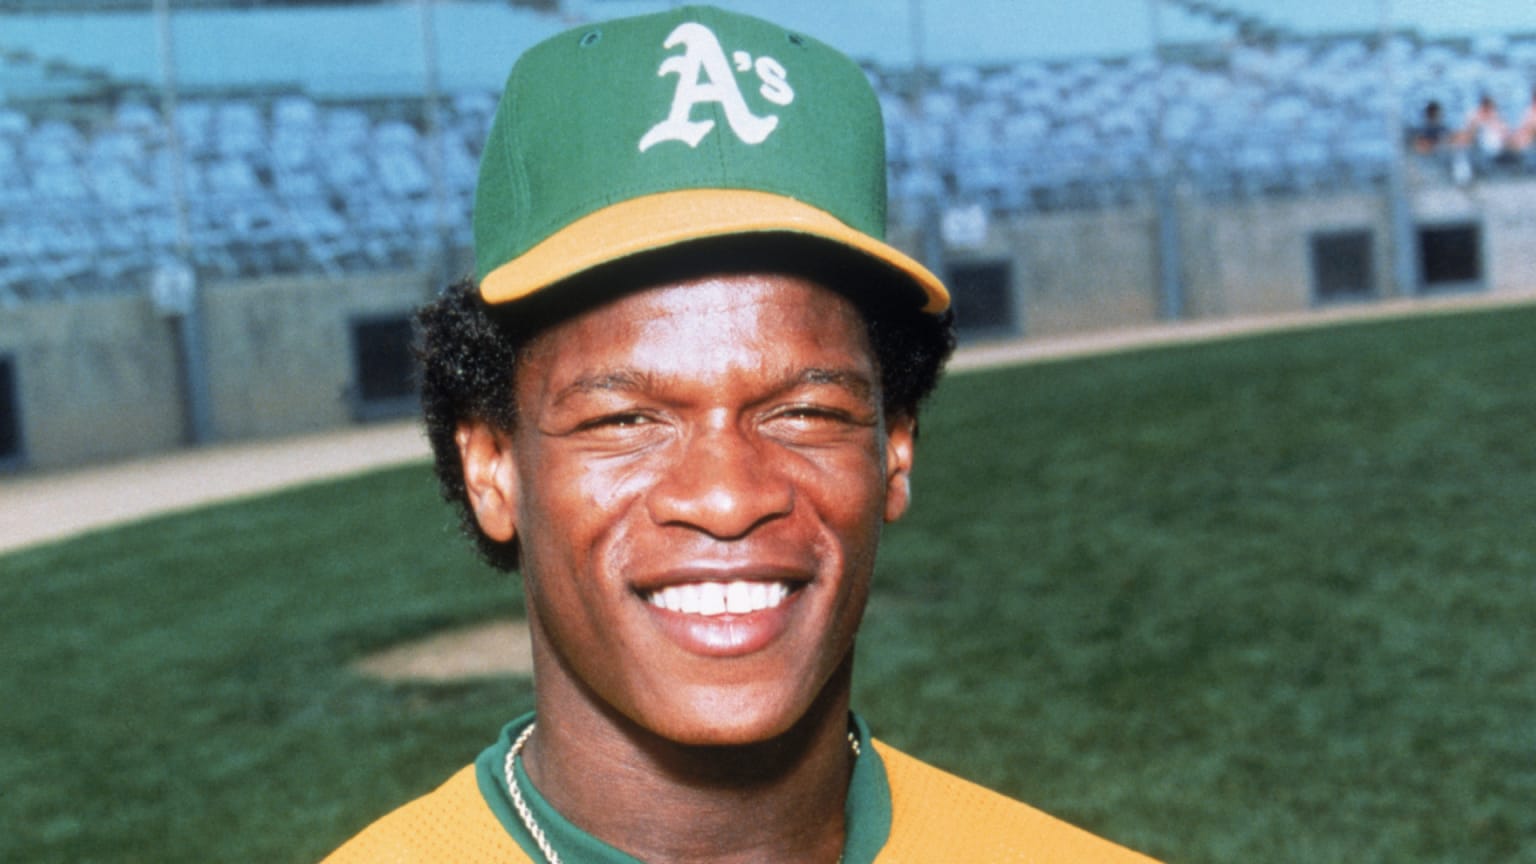 A smiling Rickey Henderson wearing the green and gold of the Oakland A's